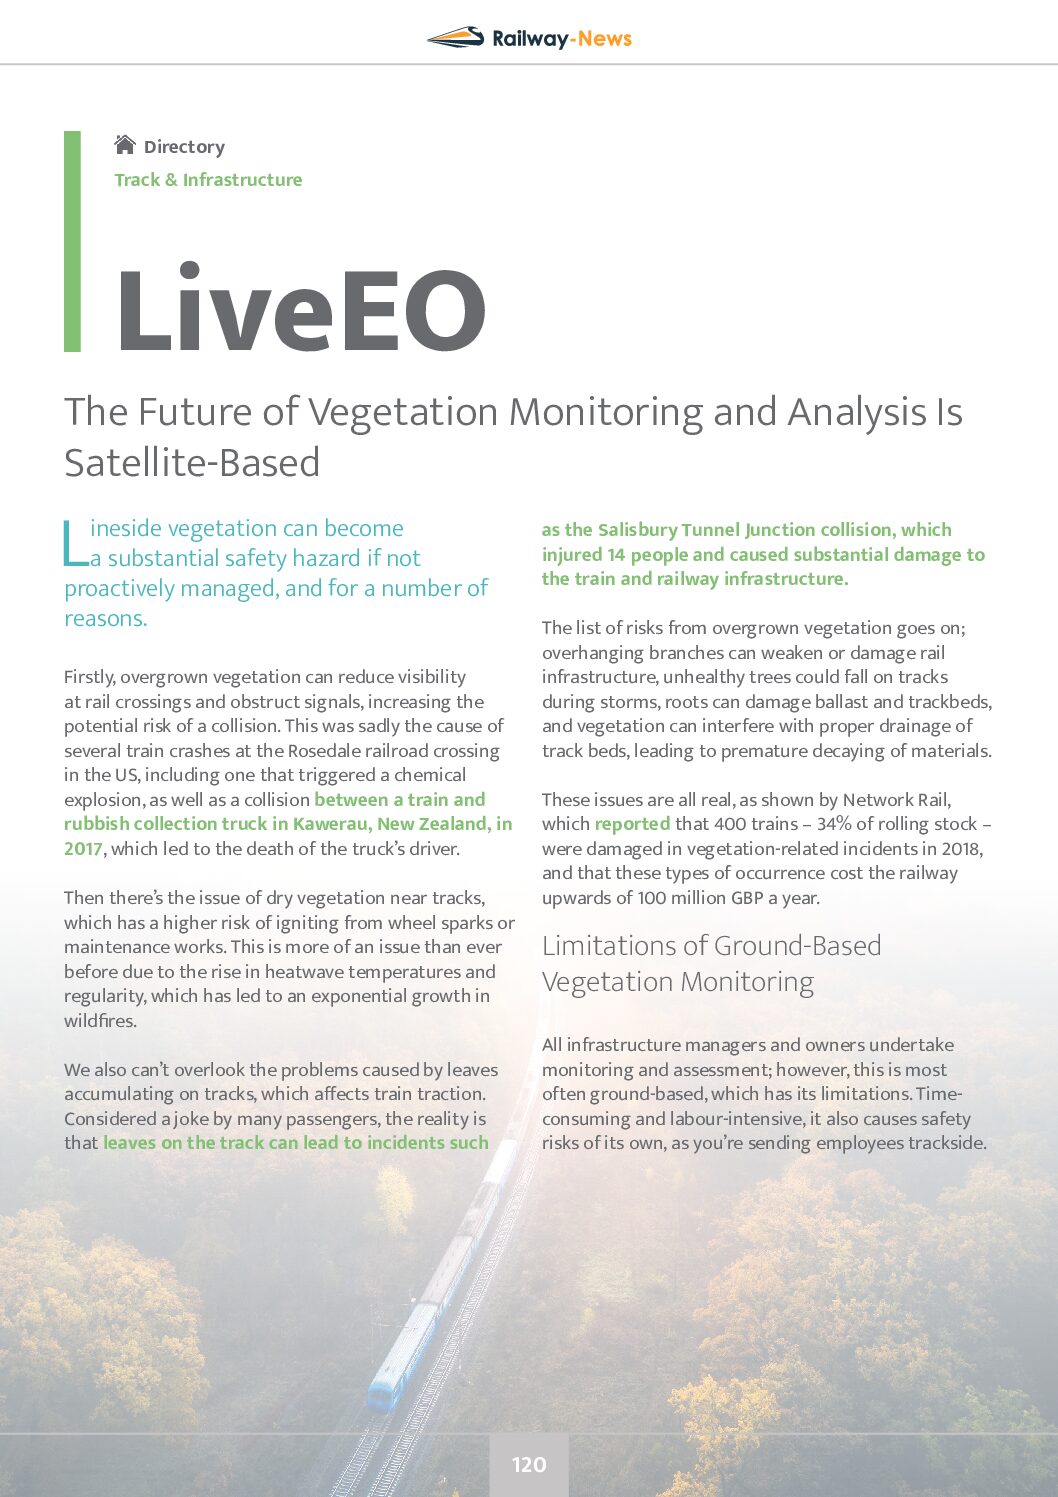 The Future of Vegetation Monitoring and Analysis Is Satellite-Based